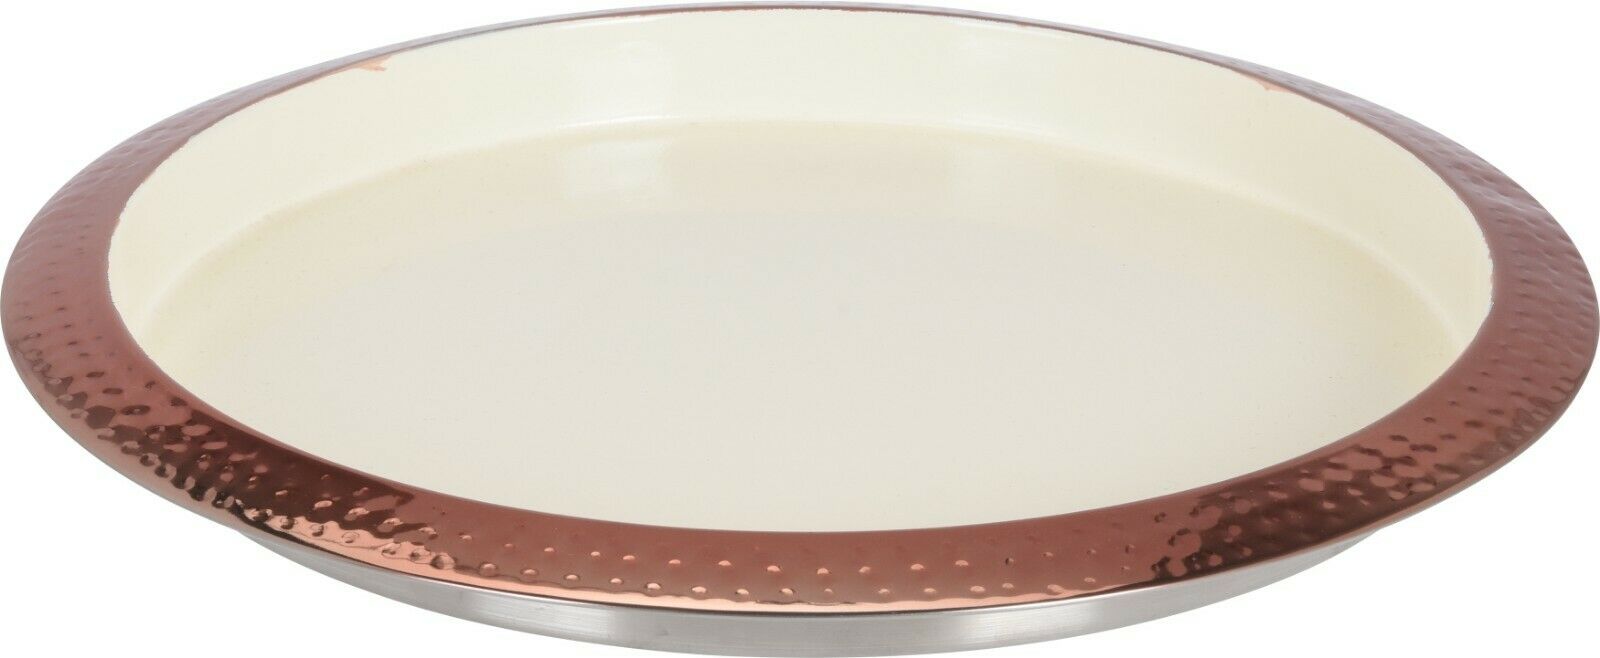 Large 35cm Round Hammered Copper & Cream Serving Tray Hammered Finish Metal Tray